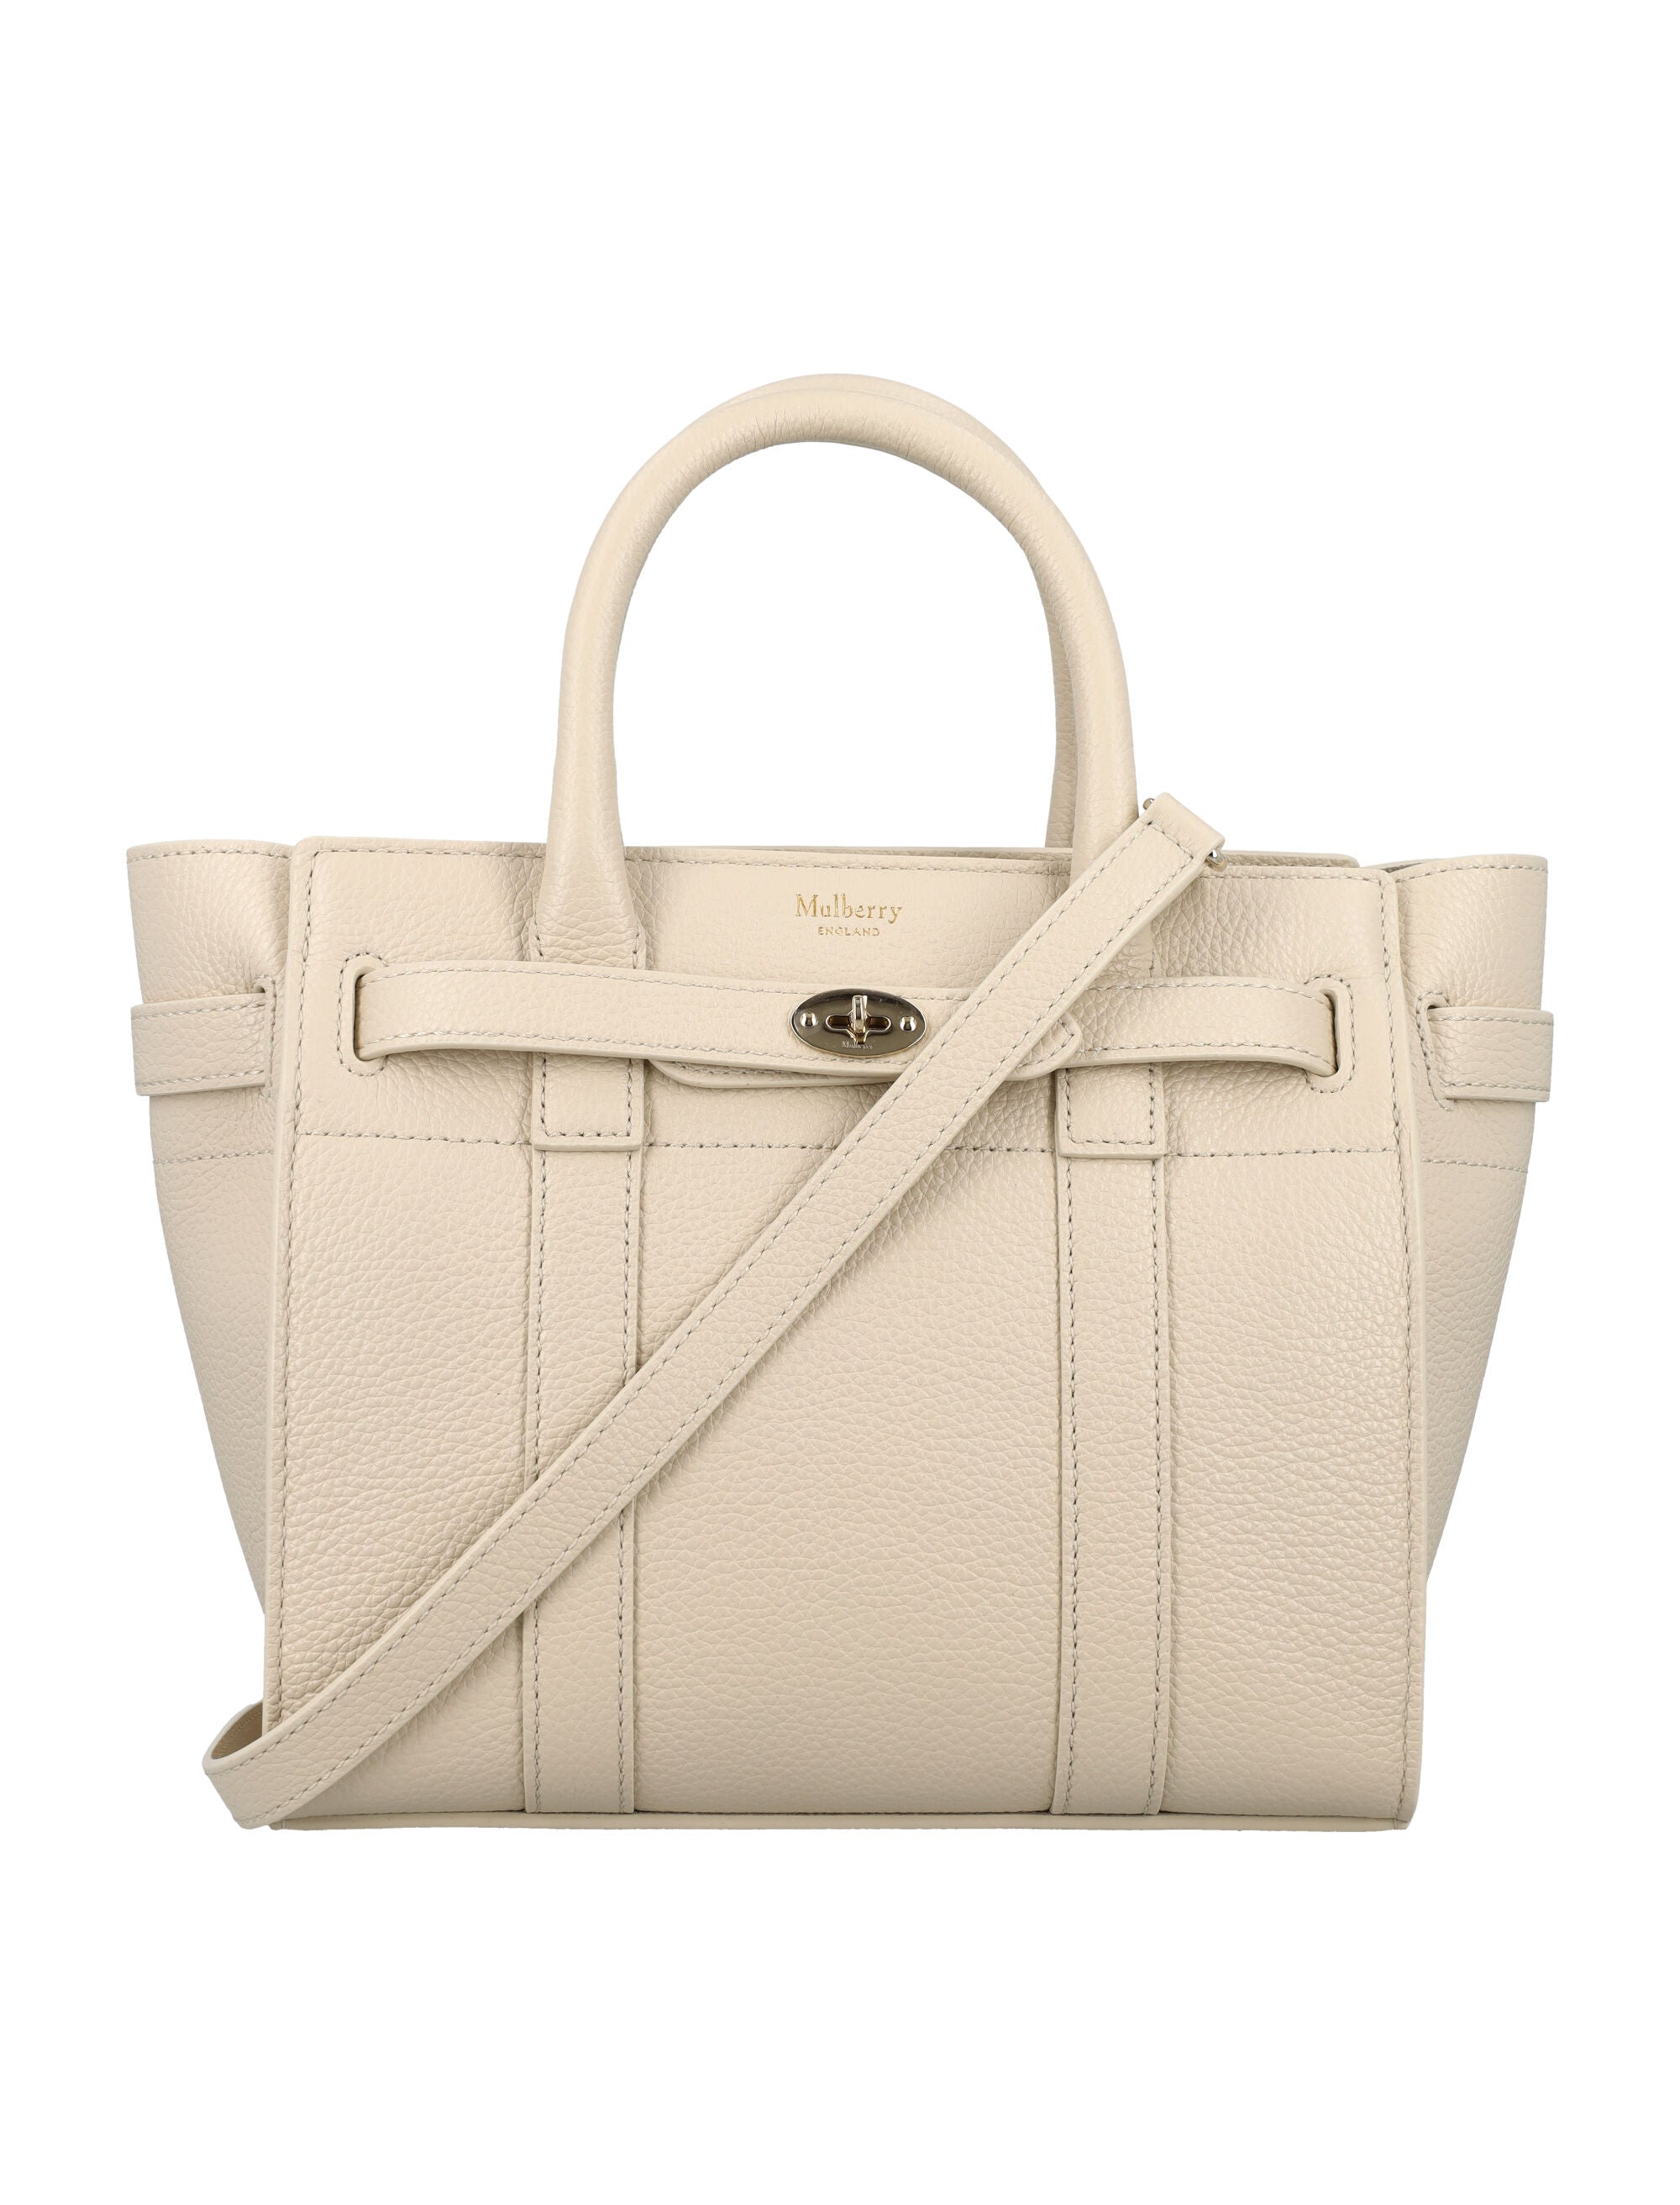 Shop Mulberry Black Leather Mini Zipped Bayswater Handbag For Women In White